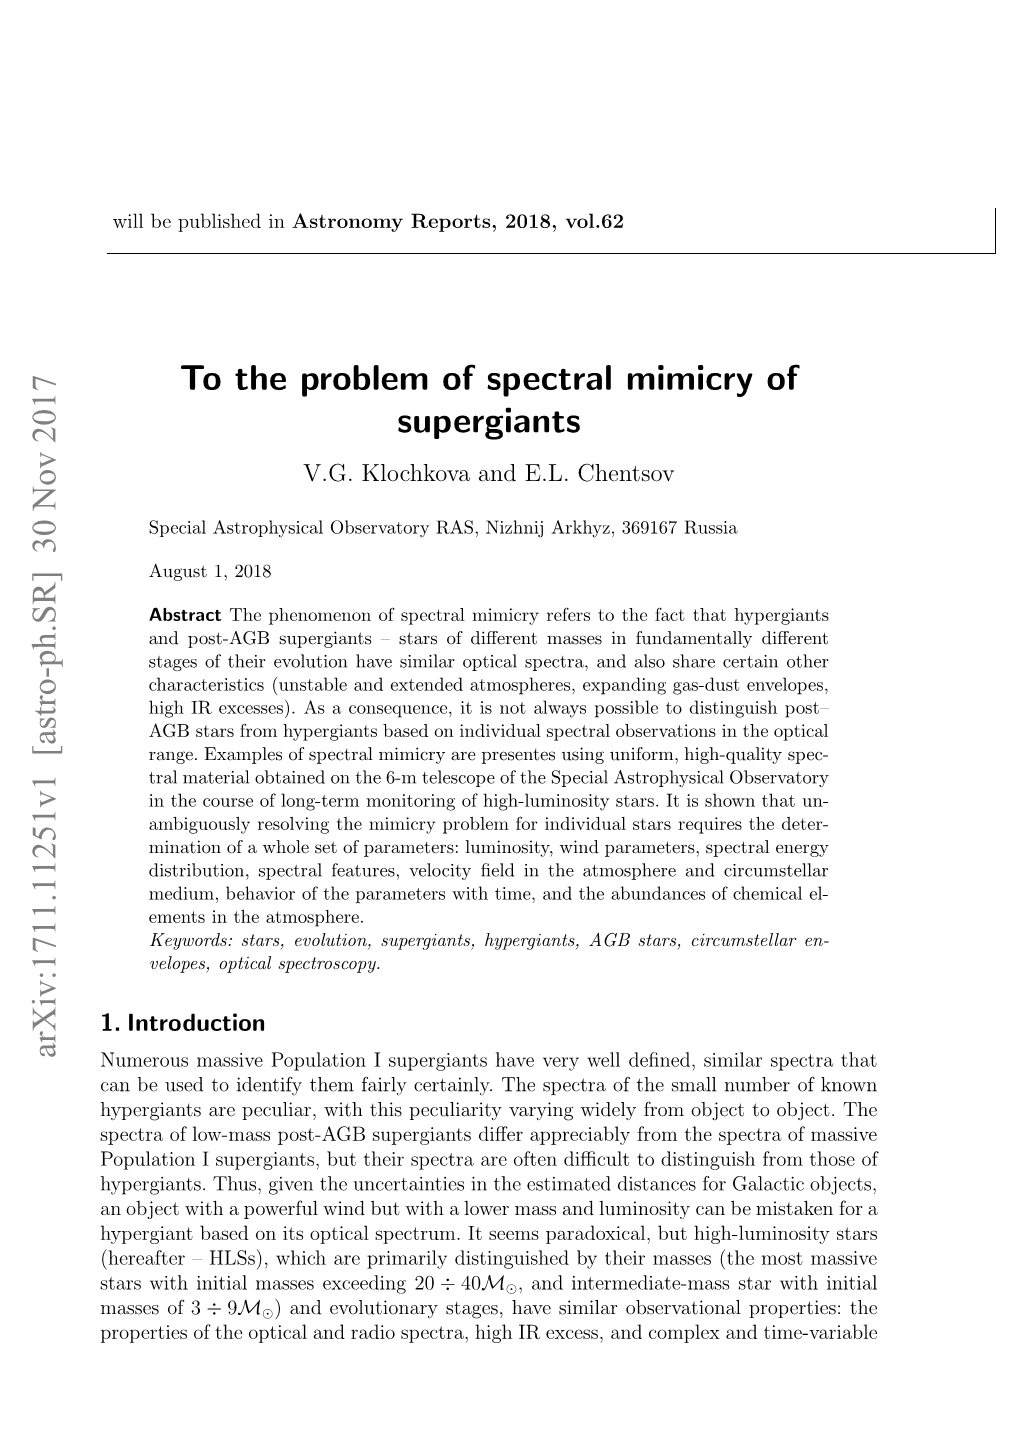 To the Problem of Spectral Mimicry of Supergiants